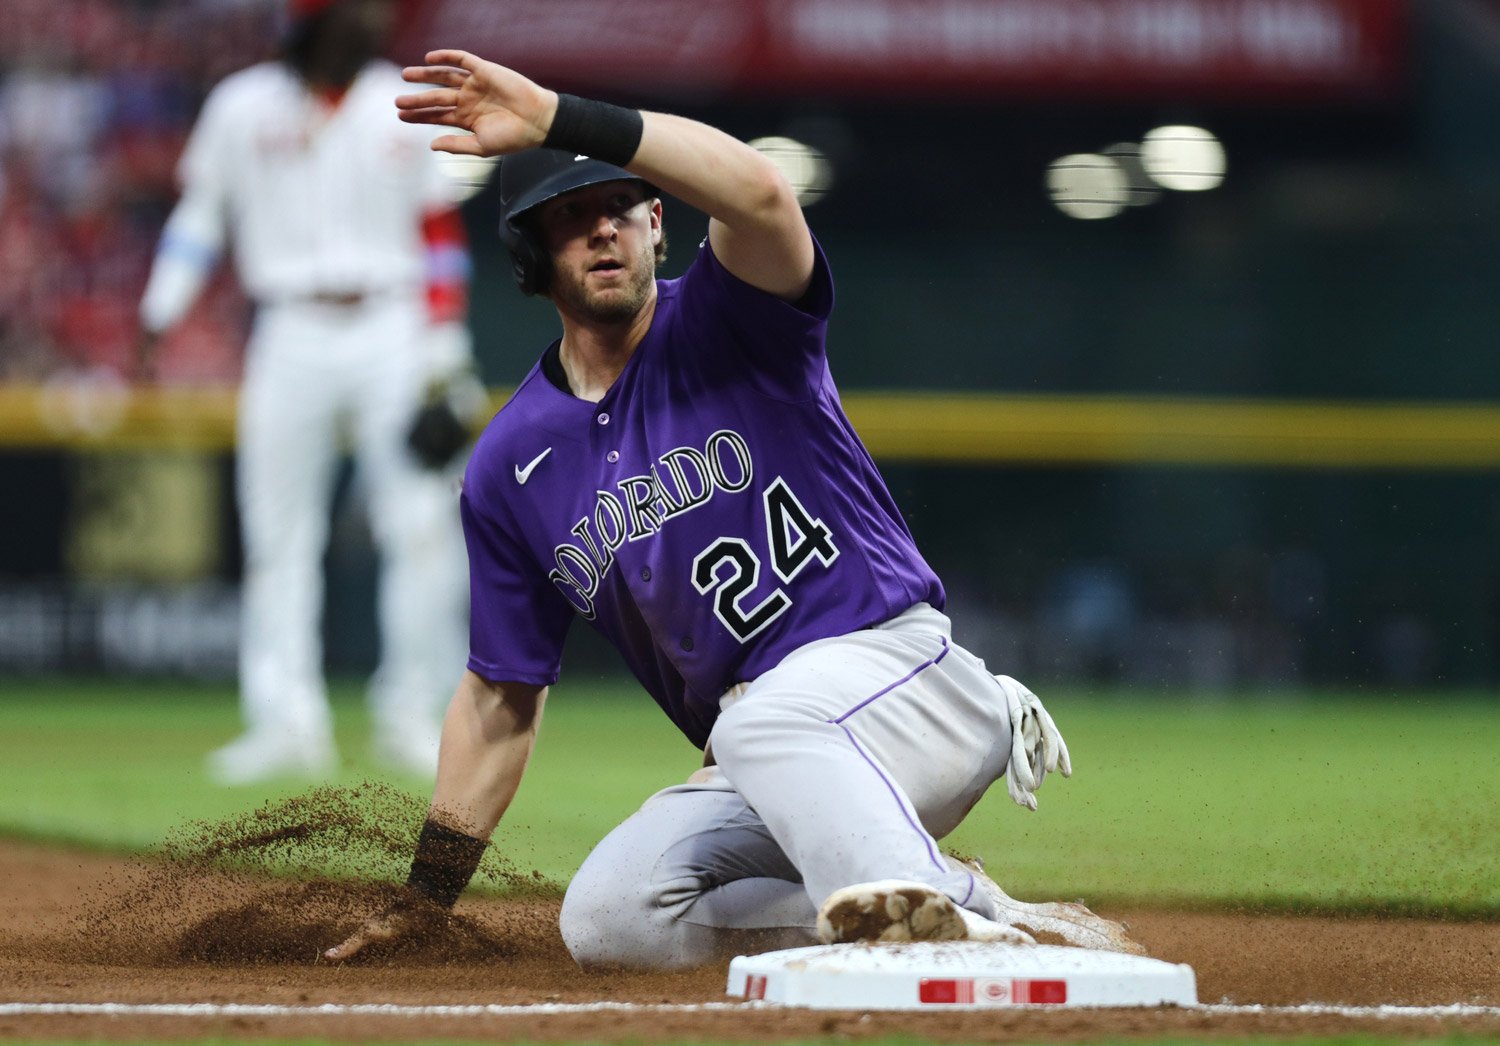 How the pitch clock is giving Kris Bryant and the Colorado Rockies